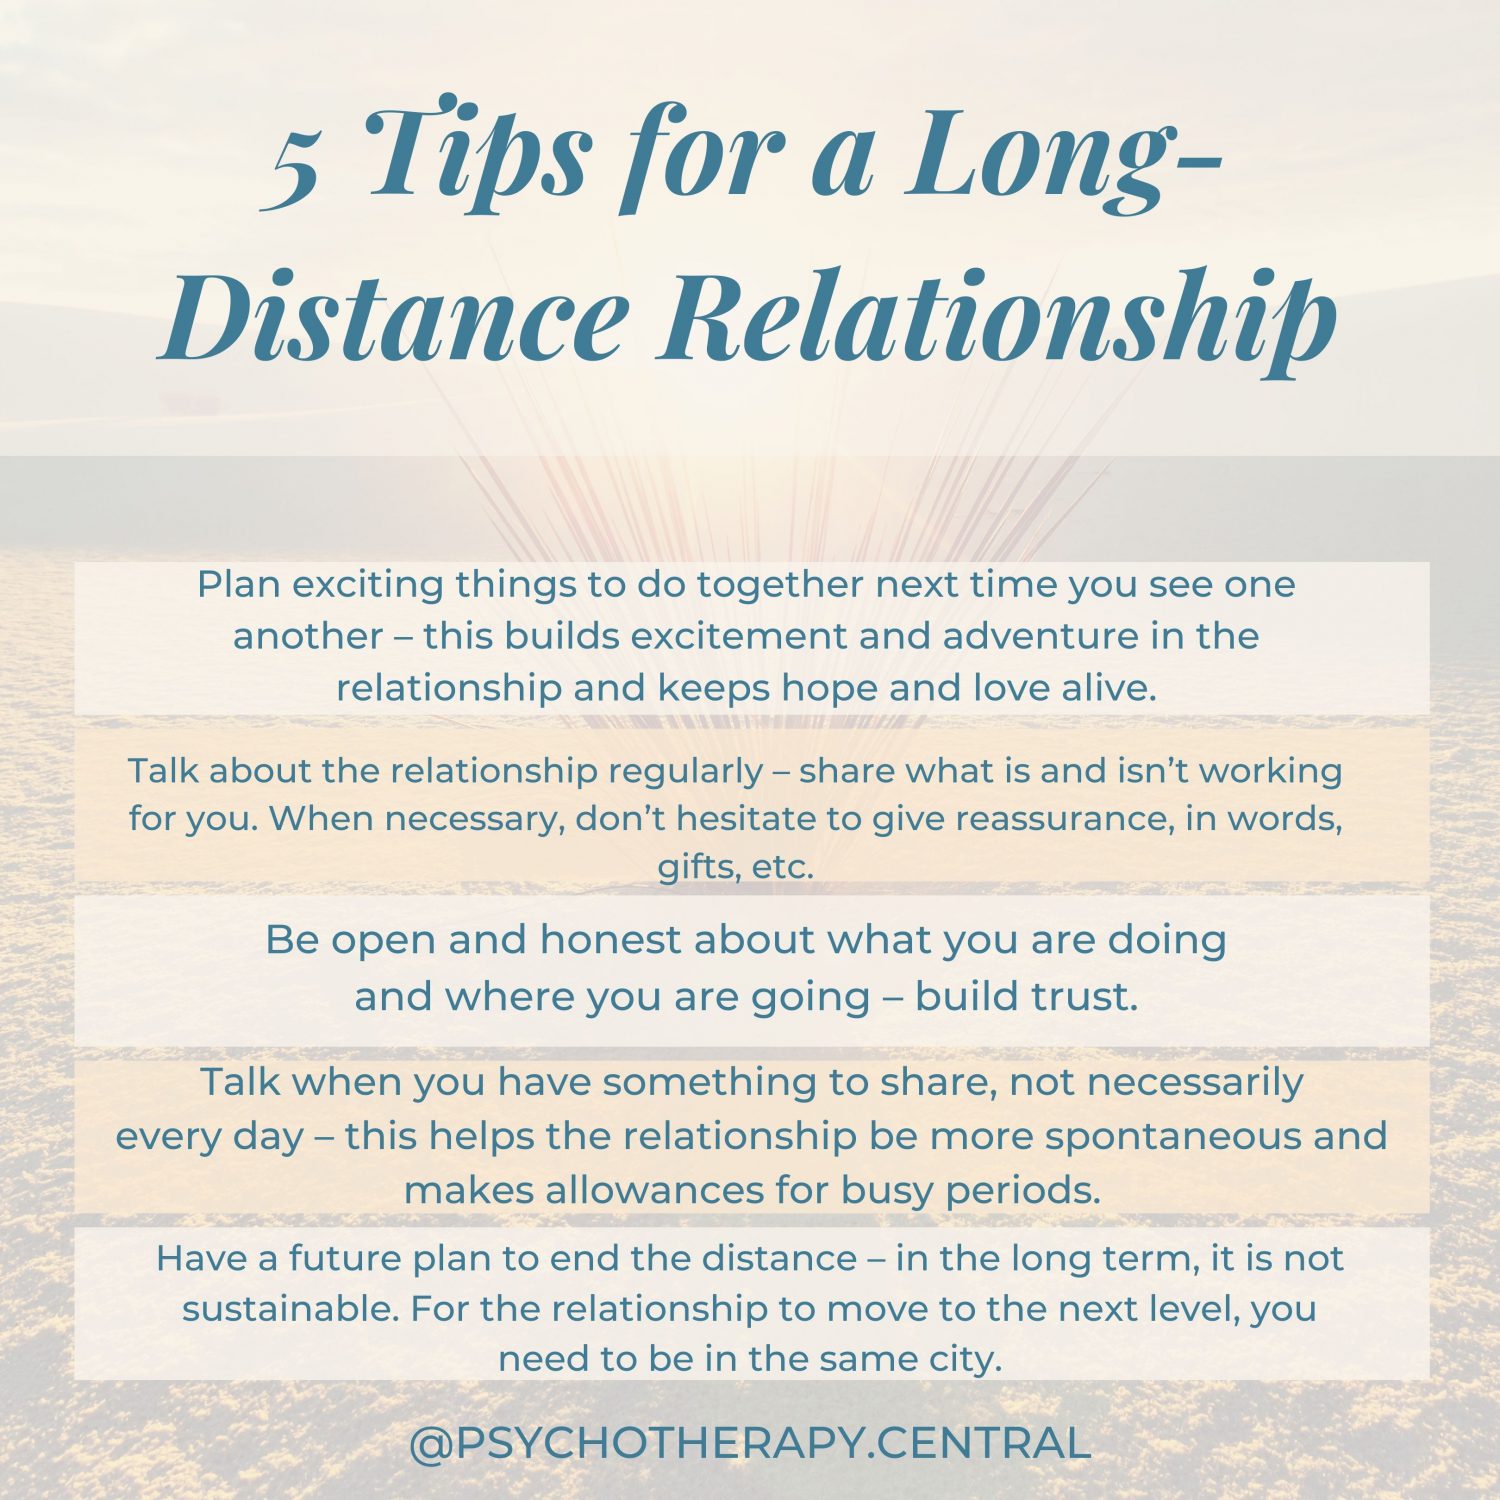 Five Tips for a Long-Distance Relationship